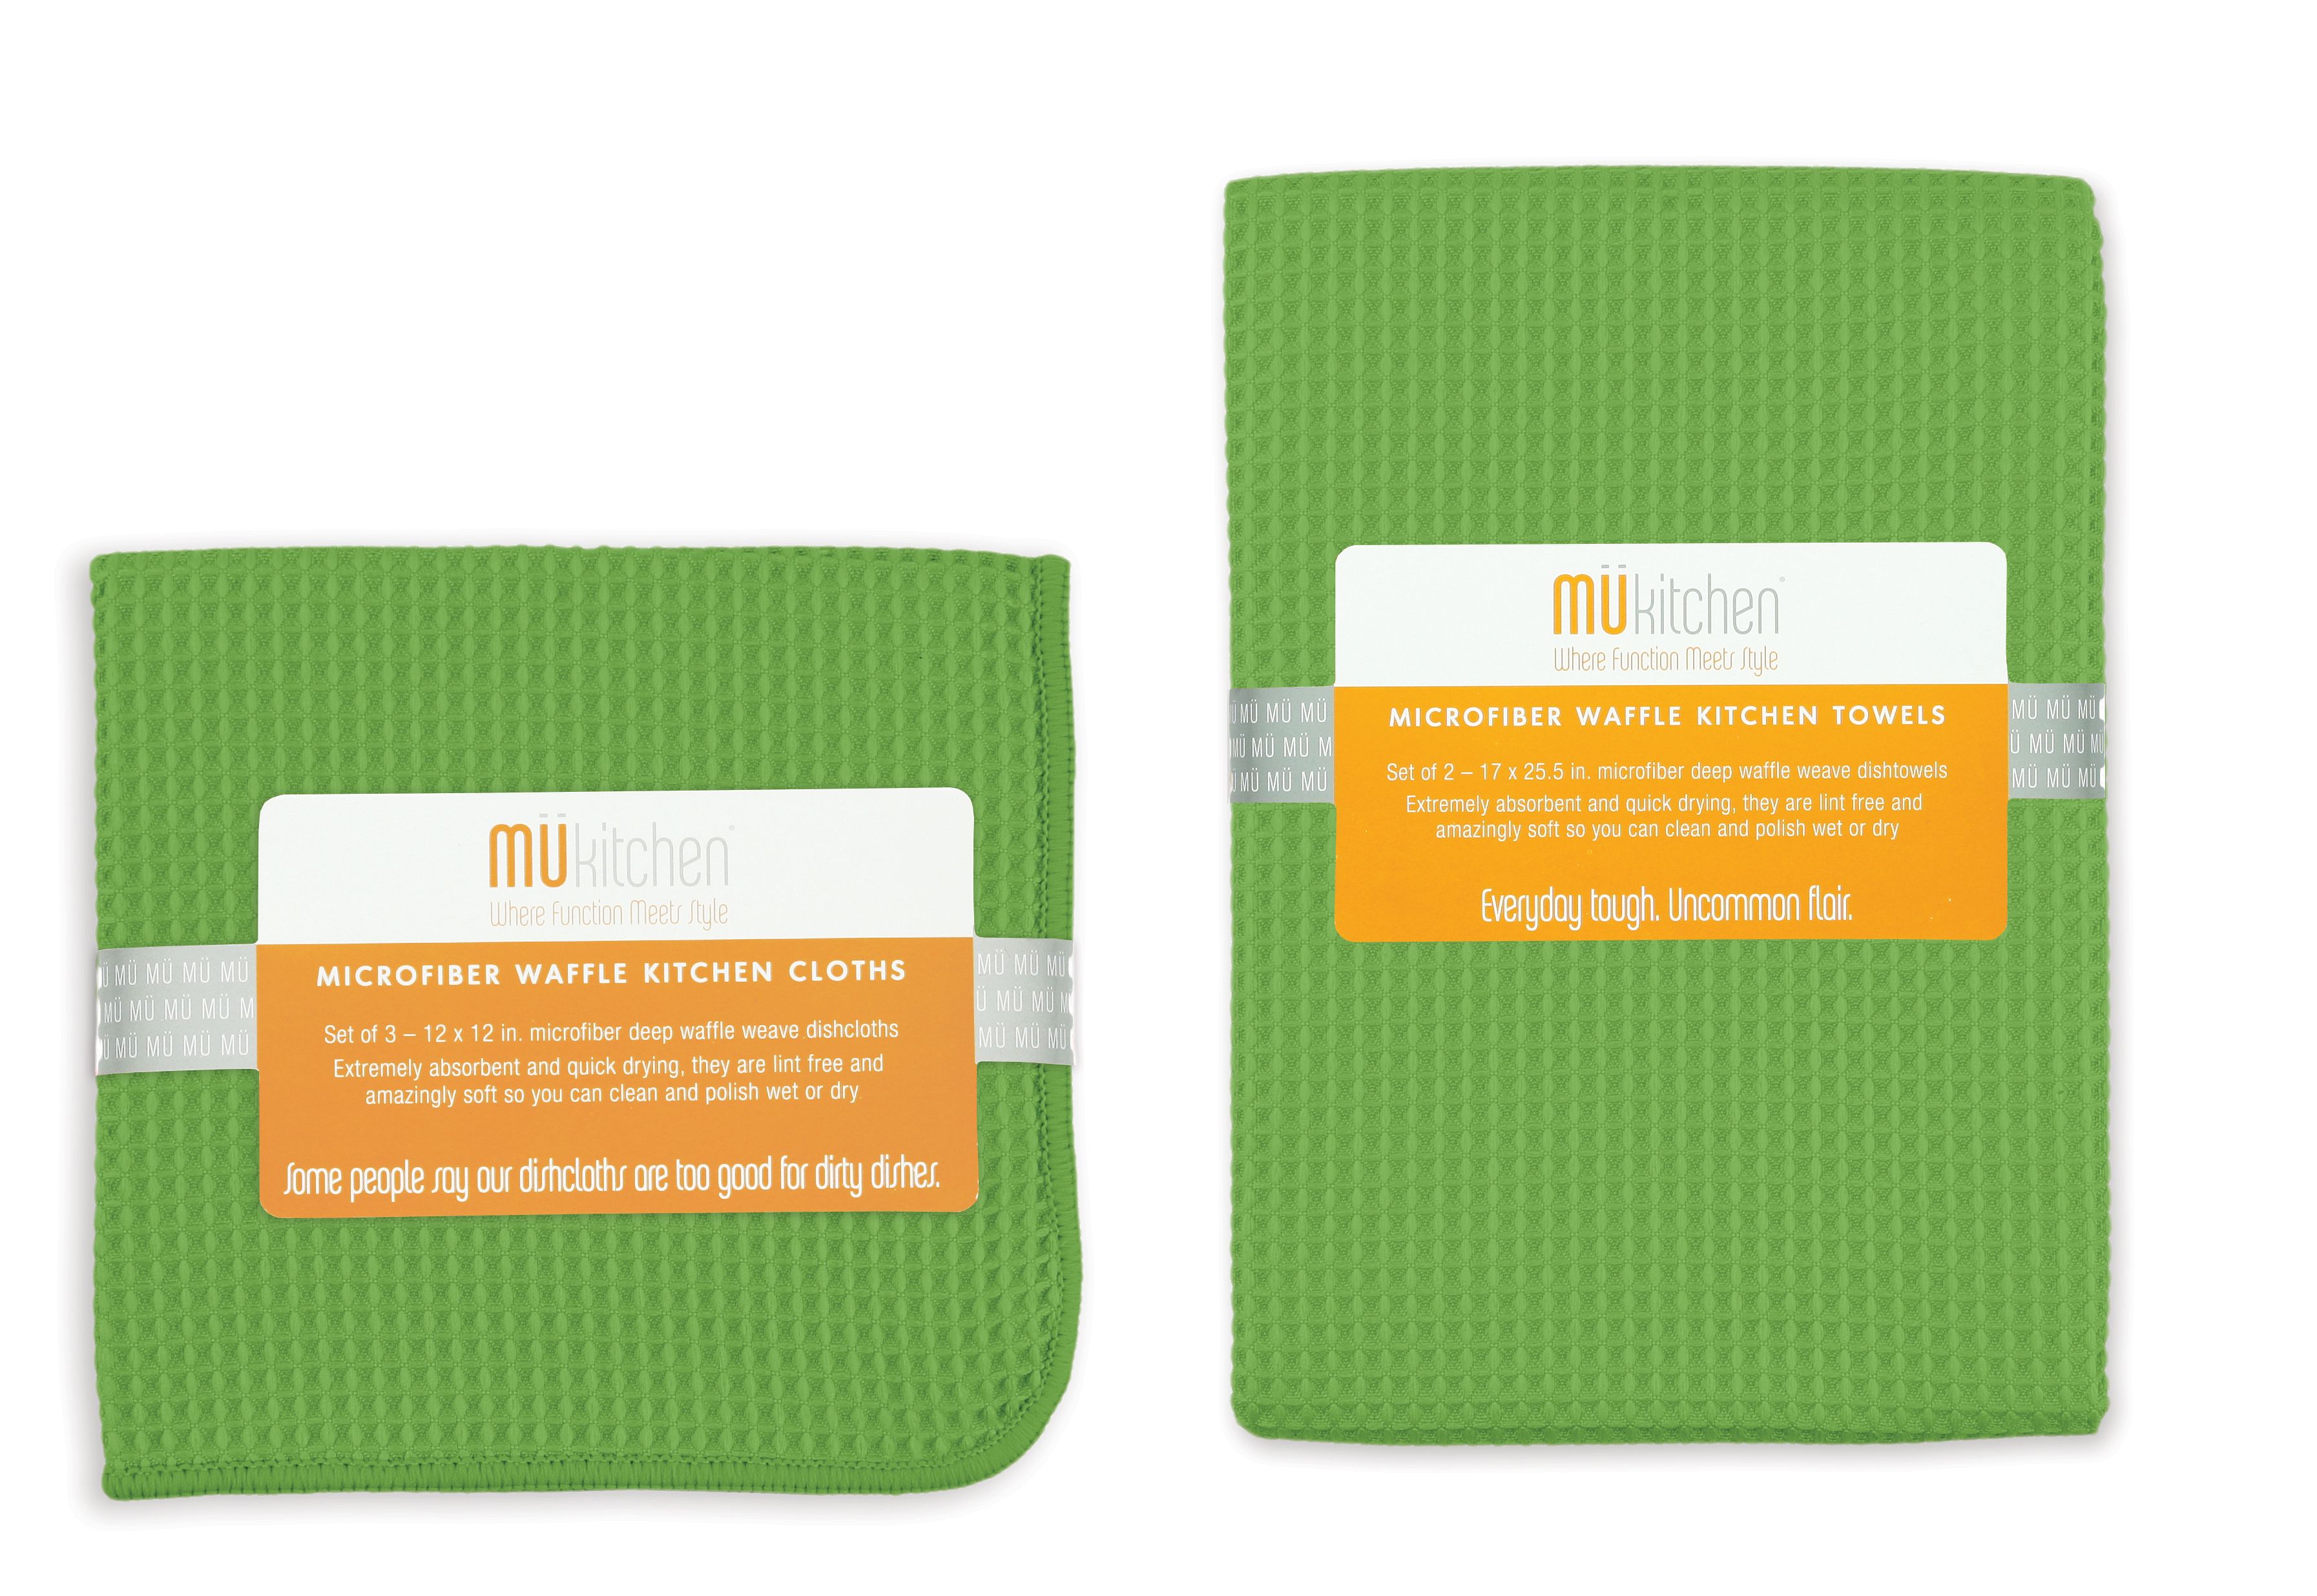 Mu Kitchen 5-Piece Microfiber Waffle Cloths and Towels Set in